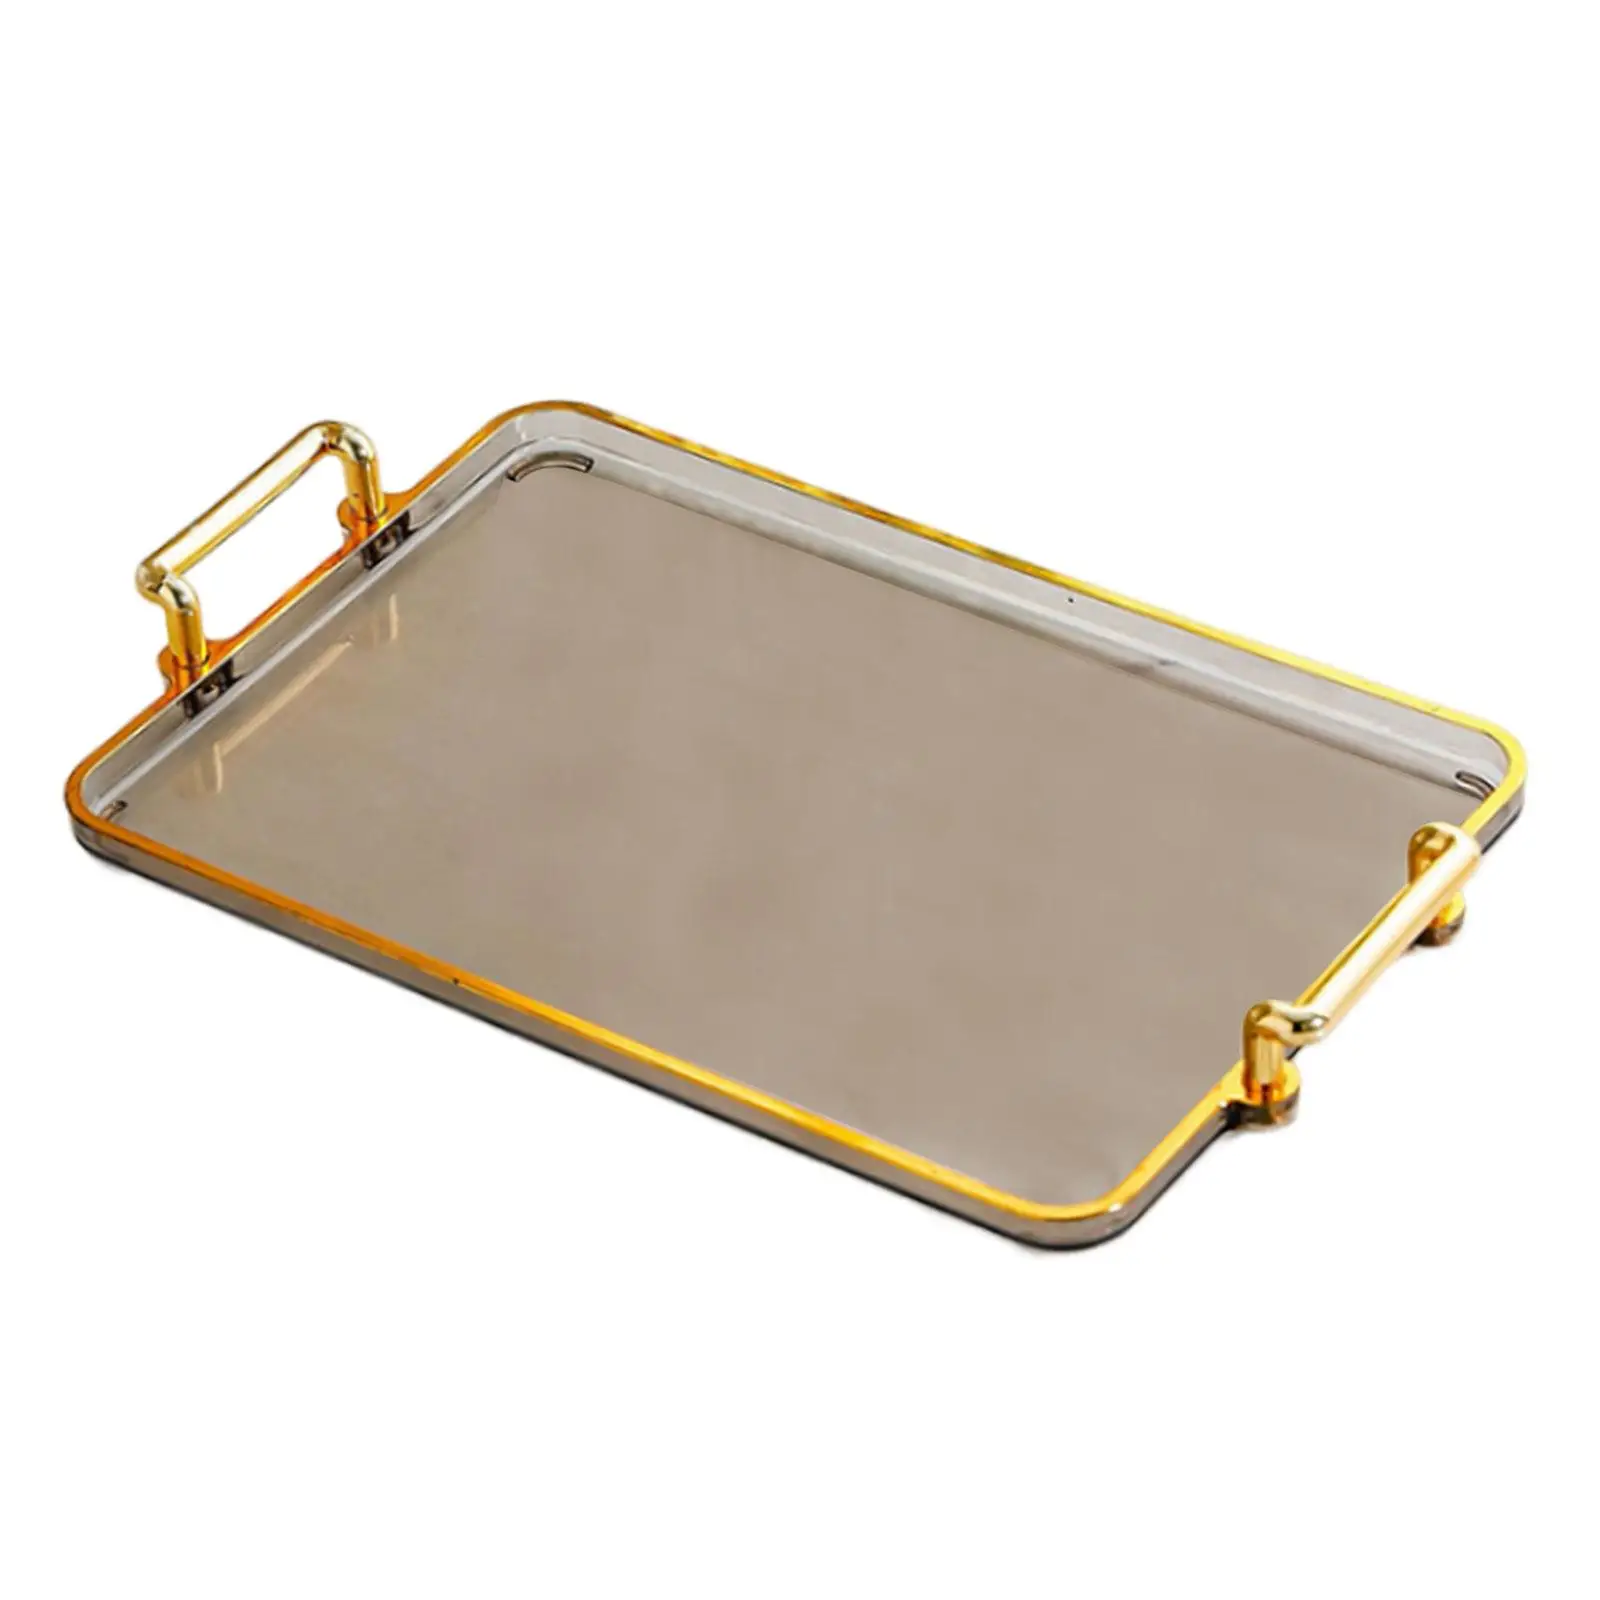 Serving Tray with Handles Food Trays for Homes, Hotels, Bars Serving Pastries, Snacks, Coffee, Tea Rectangular Gold Tray